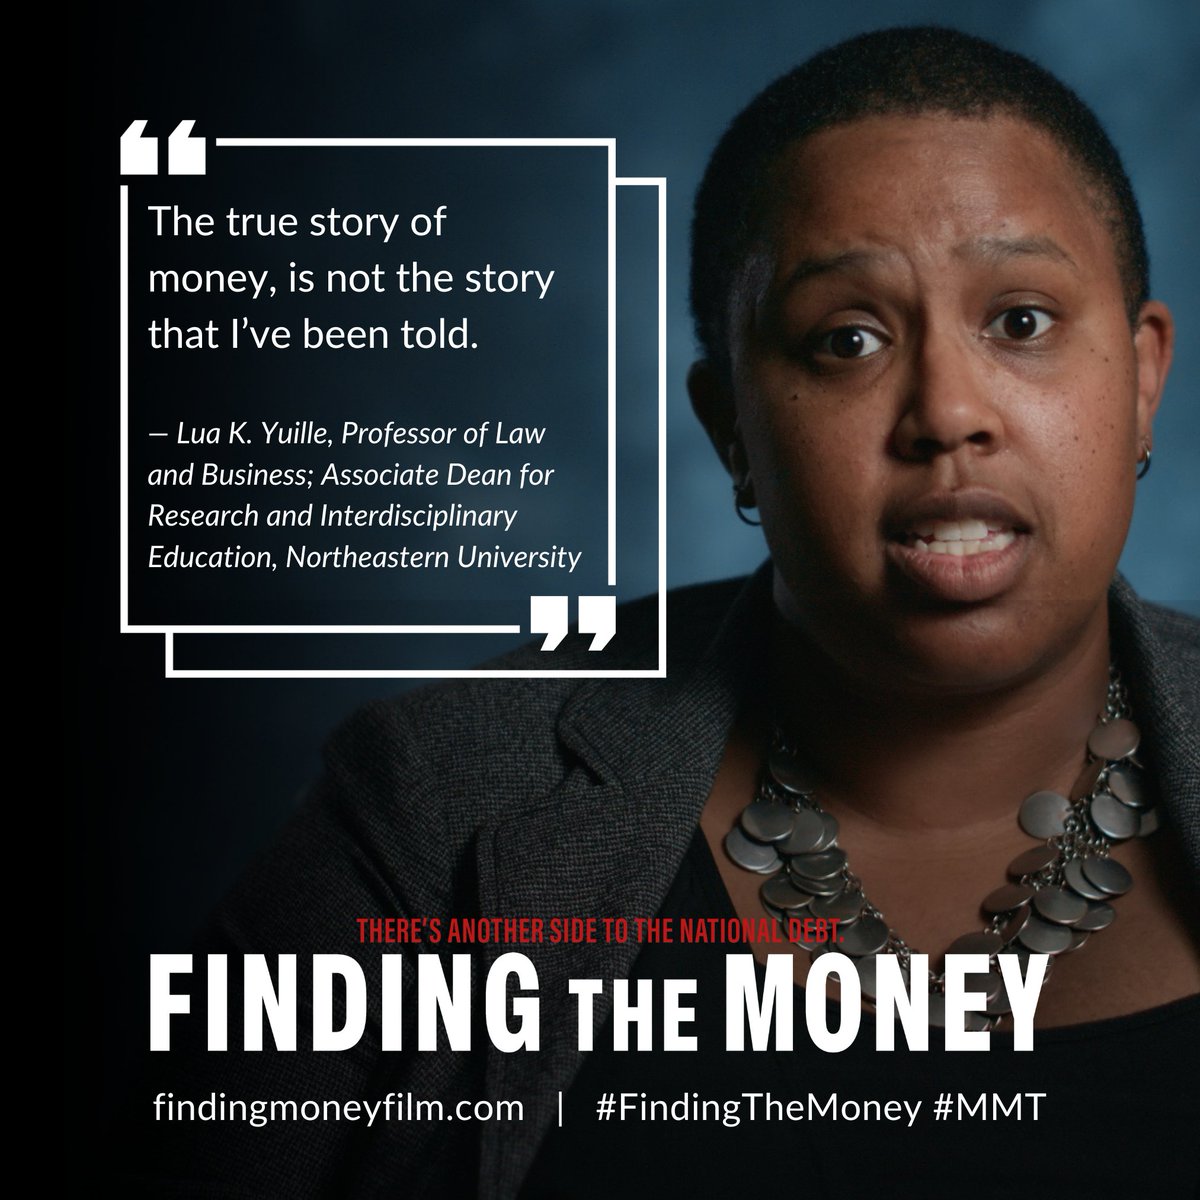 🧵 * EXPERT SPOTLIGHT * Featured throughout FINDING THE MONEY is Lua Kamál Yuille. @ProfYuille  joined the @Northeastern University faculty in 2021 as professor of law and business within the School of Law and @NU_Business. #FindingTheMoney #MMT #ModernMonetaryTheory 1/5